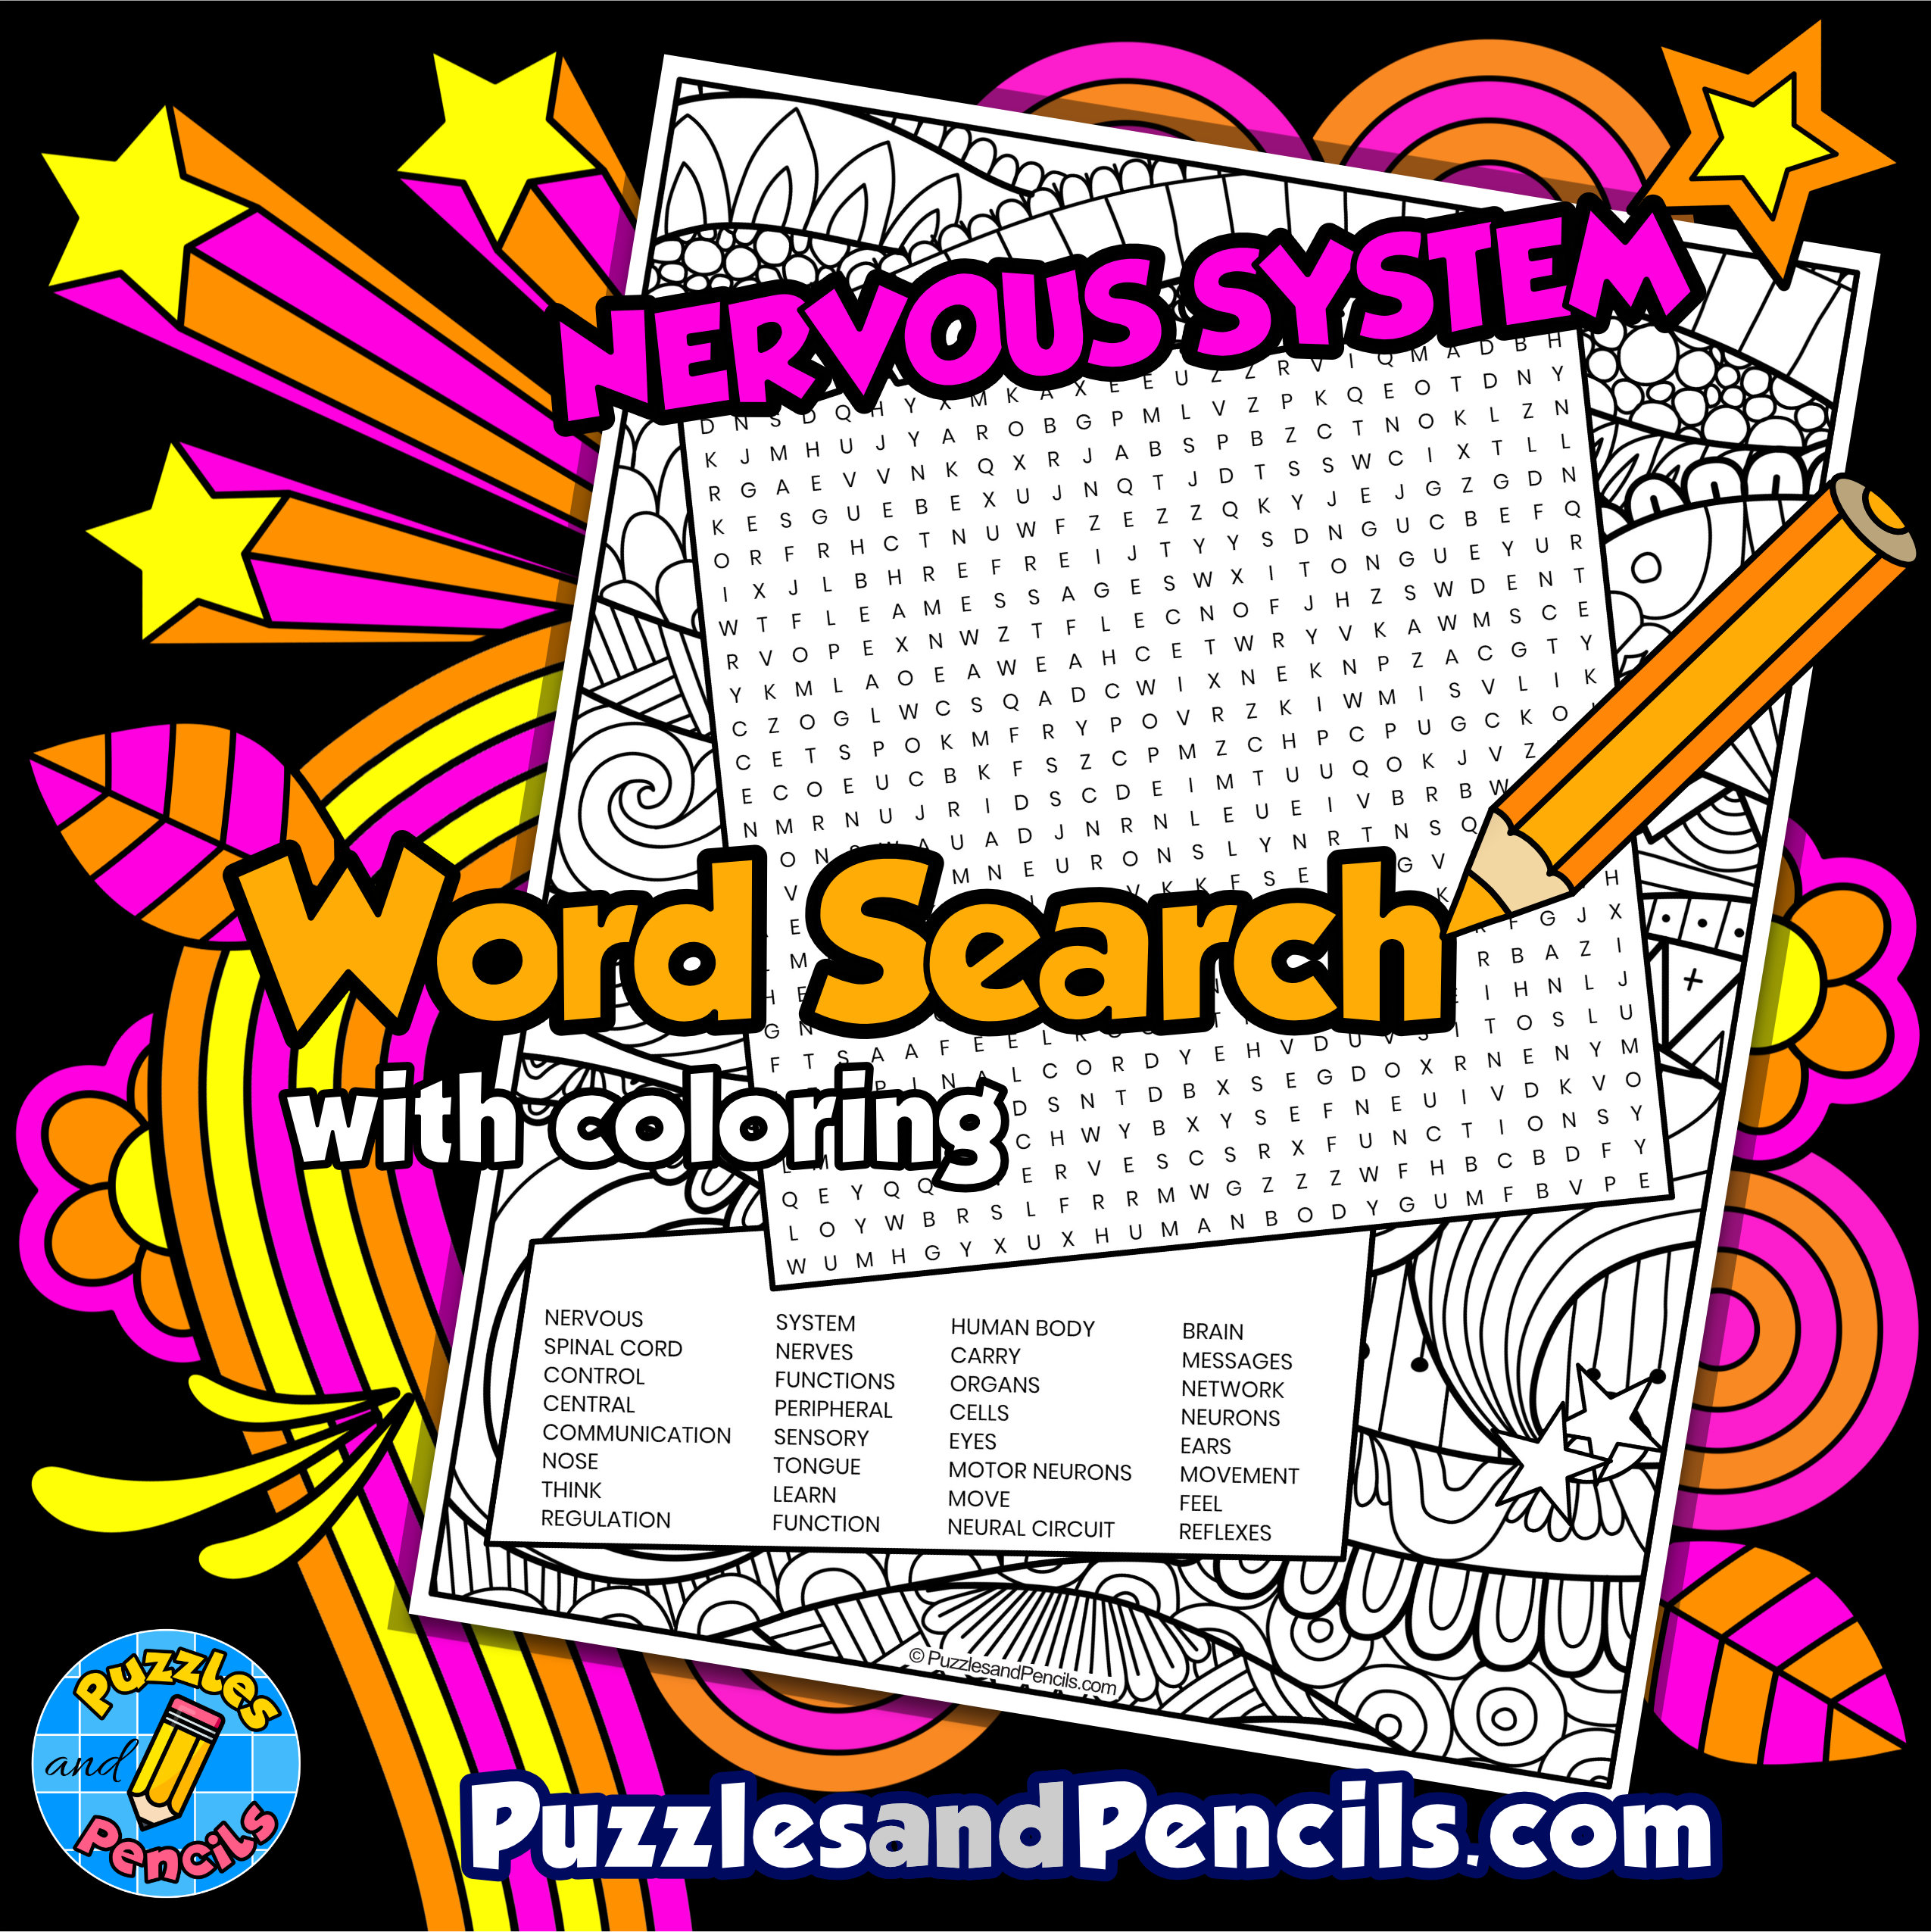 Nervous system word search puzzle with coloring human body systems wordsearch made by teachers